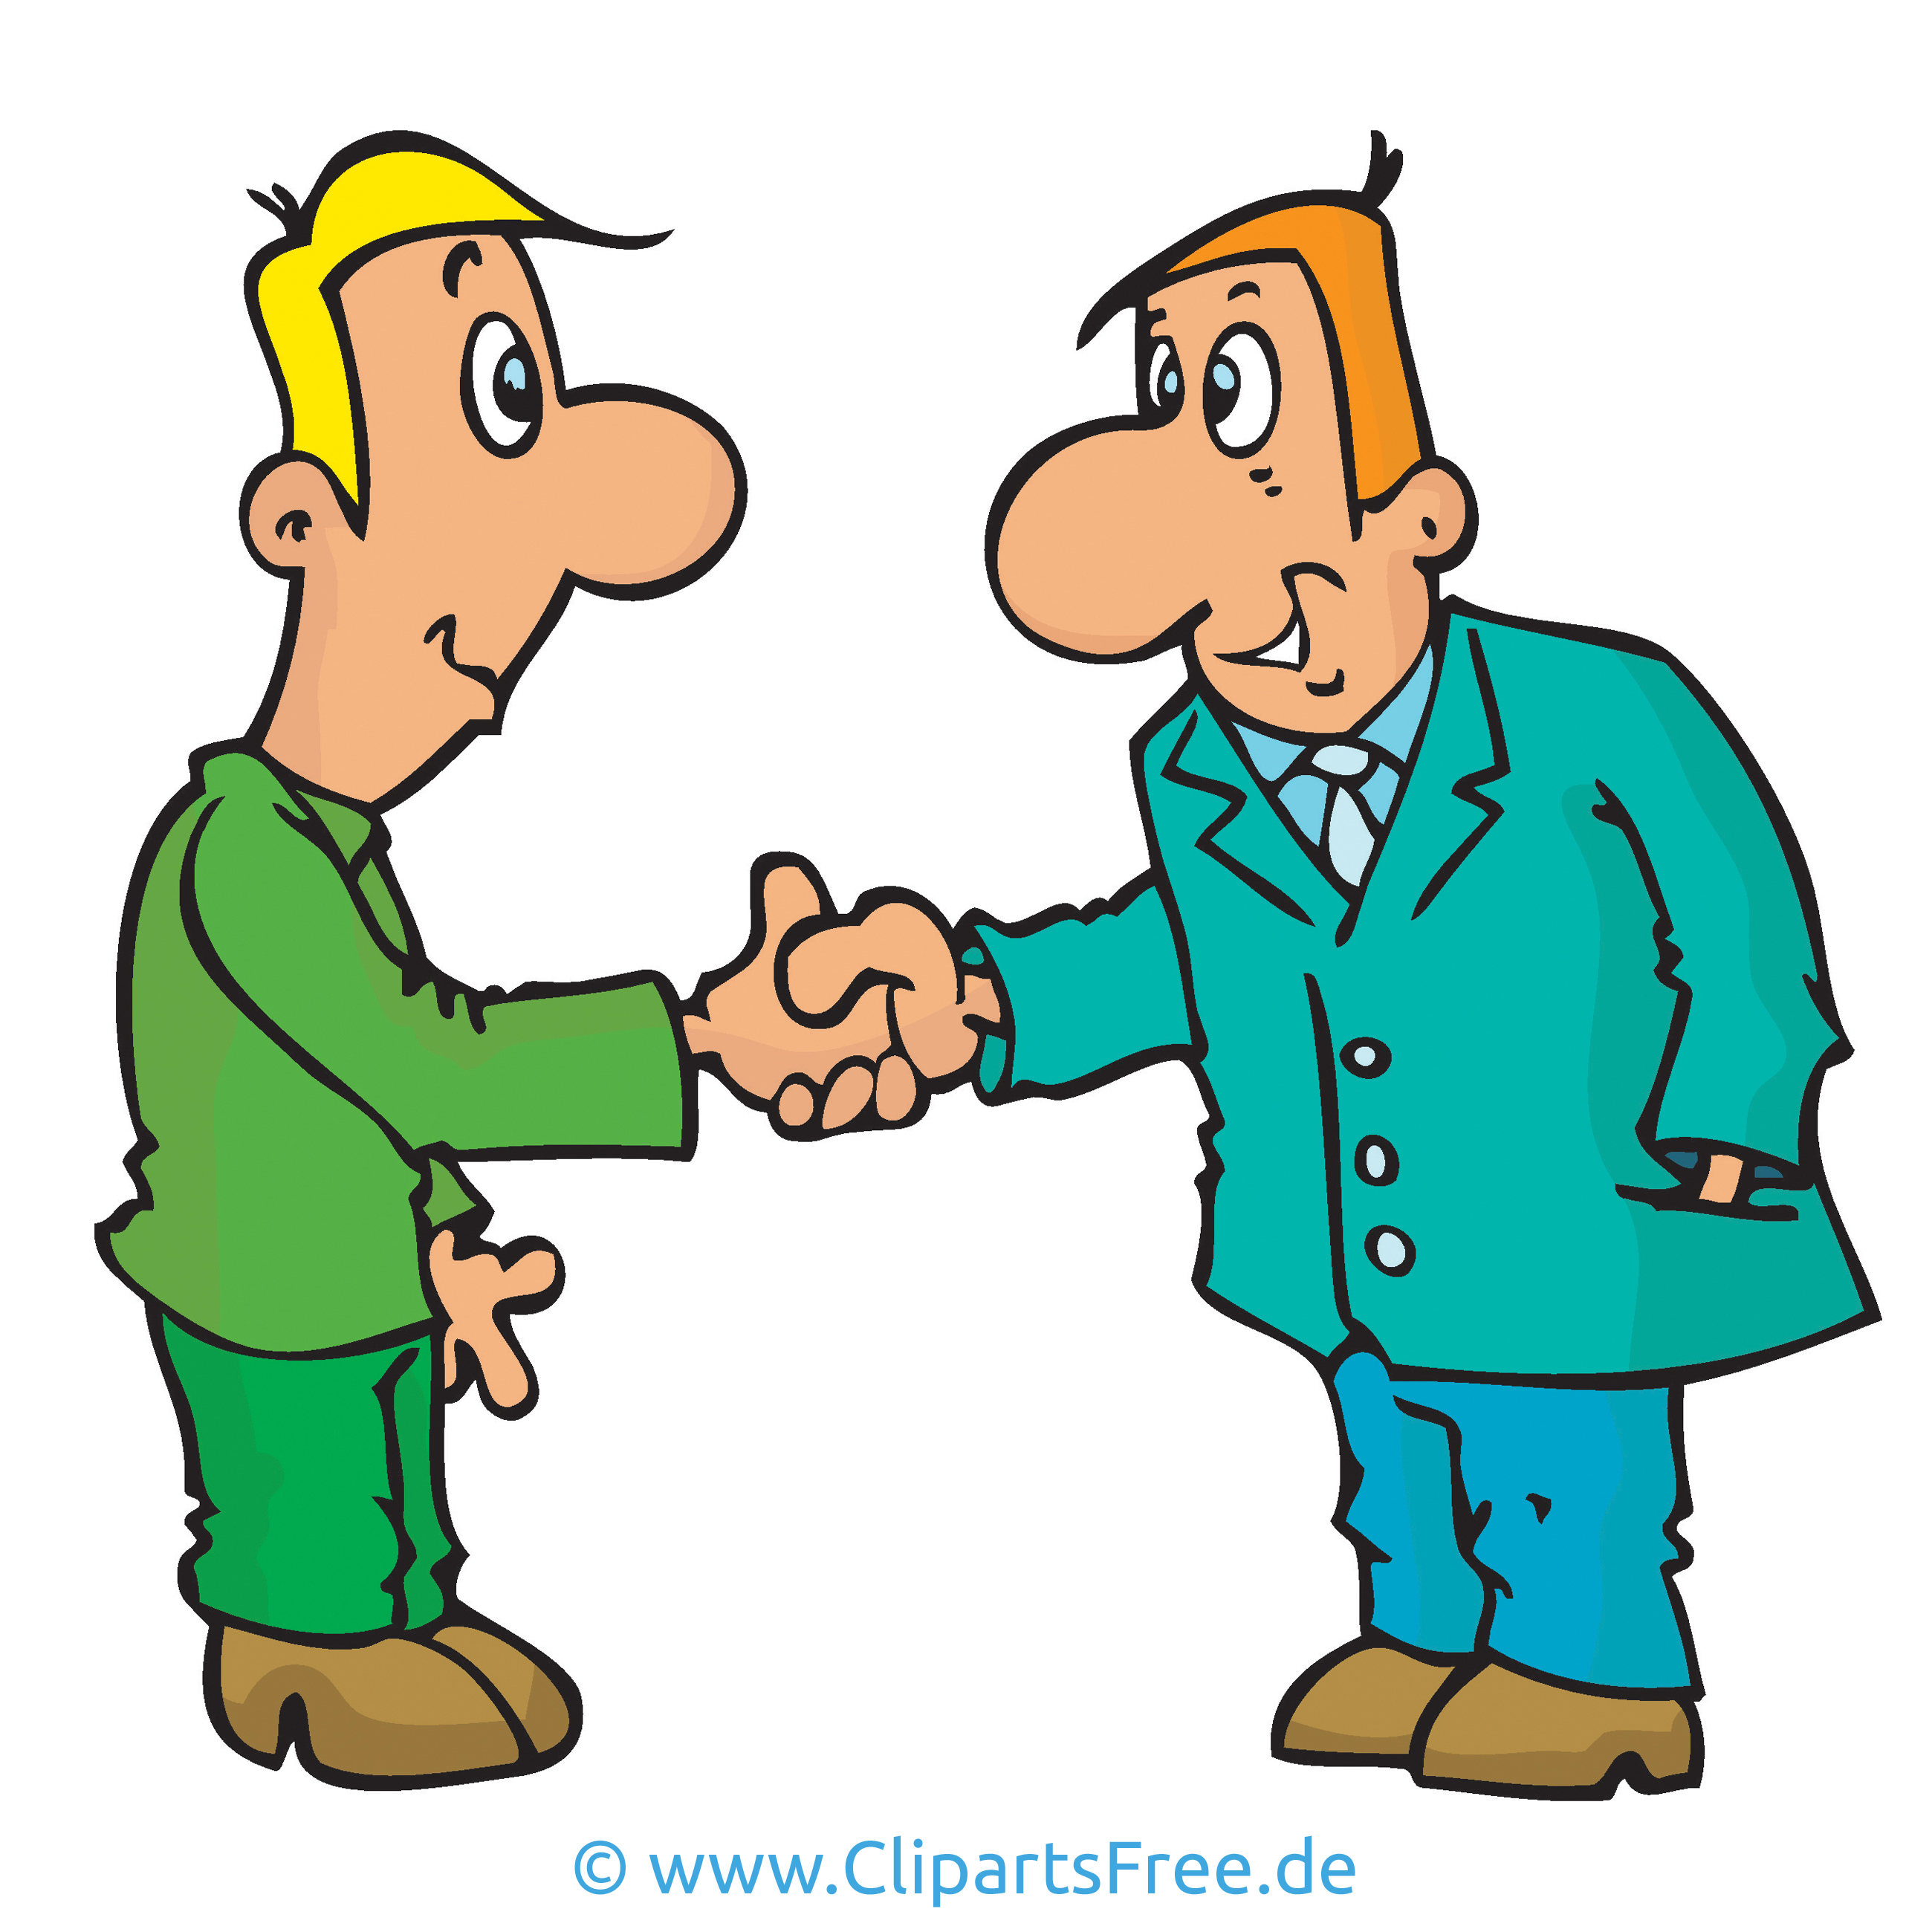 funny meeting clipart - photo #46